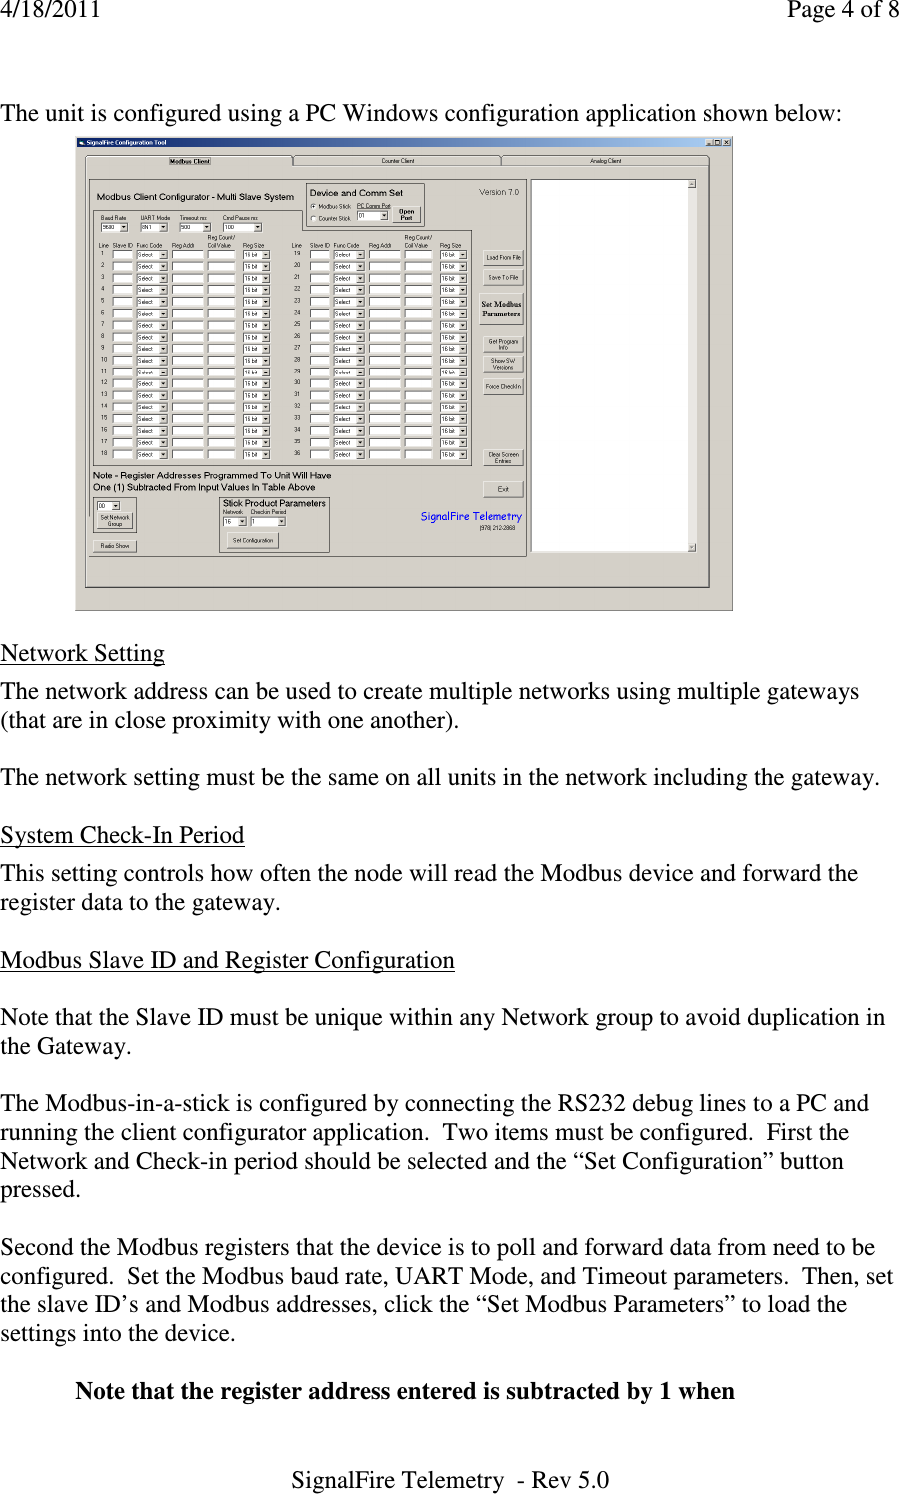 4/18/2011    Page 4 of 8 SignalFire Telemetry  - Rev 5.0  The unit is configured using a PC Windows configuration application shown below:    Network Setting  The network address can be used to create multiple networks using multiple gateways (that are in close proximity with one another).  The network setting must be the same on all units in the network including the gateway.  System Check-In Period  This setting controls how often the node will read the Modbus device and forward the register data to the gateway.   Modbus Slave ID and Register Configuration  Note that the Slave ID must be unique within any Network group to avoid duplication in the Gateway.      The Modbus-in-a-stick is configured by connecting the RS232 debug lines to a PC and running the client configurator application.  Two items must be configured.  First the Network and Check-in period should be selected and the “Set Configuration” button pressed.    Second the Modbus registers that the device is to poll and forward data from need to be configured.  Set the Modbus baud rate, UART Mode, and Timeout parameters.  Then, set the slave ID’s and Modbus addresses, click the “Set Modbus Parameters” to load the settings into the device.    Note that the register address entered is subtracted by 1 when  